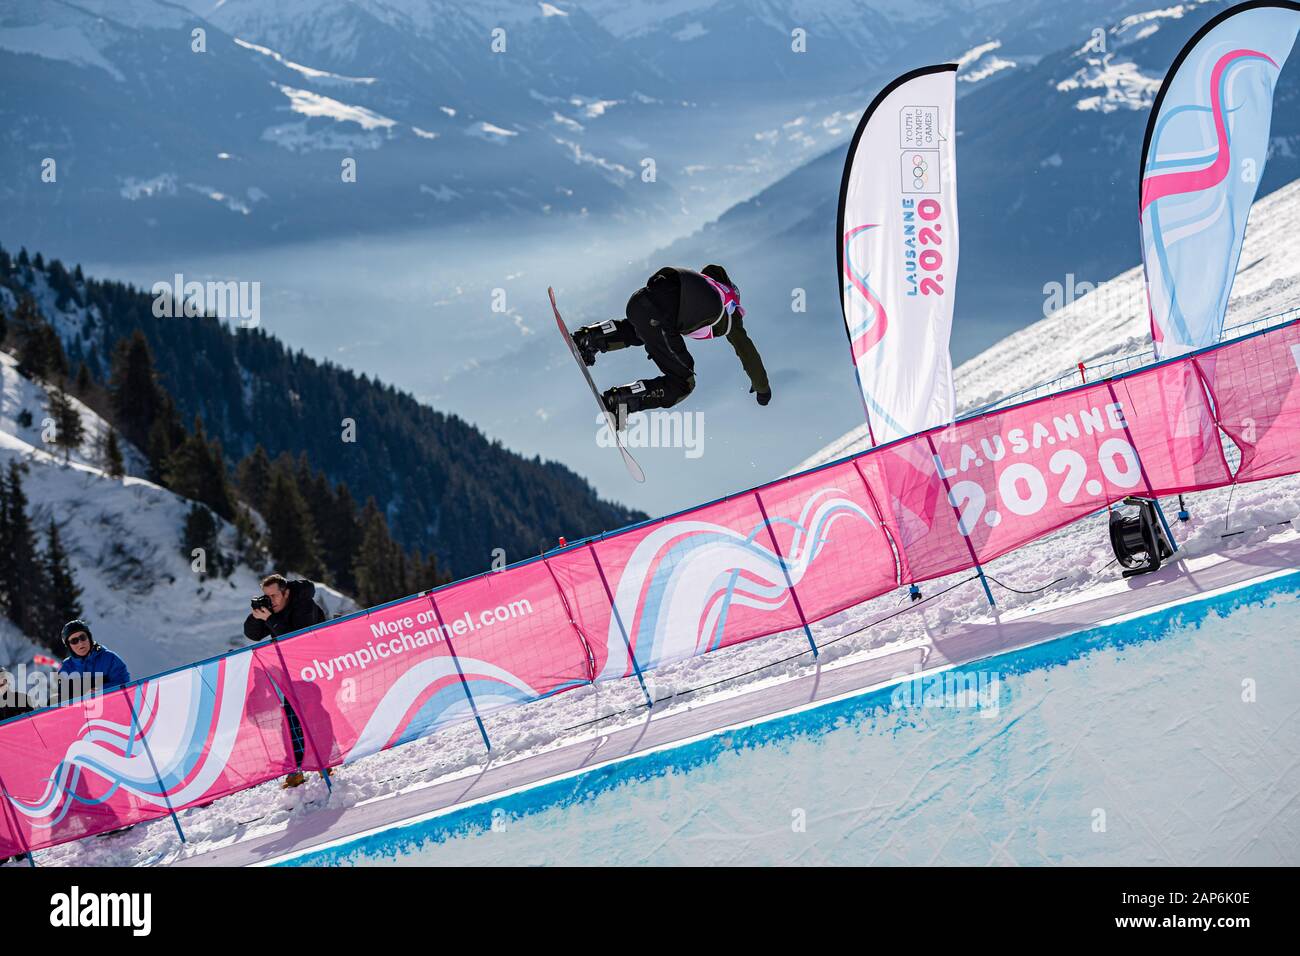 LAUSANNE, SWITZERLAND. 21th, Jan 2020. BREARLEY Liam (CAN) competes in the Men's Snowboard Halfpipe competitions during the Lausanne 2020 Youth Olympic Games at Leysin Park & Pipe on Tuesday, 21 January 2020. LAUSANNE, SWITZERLAND. Credit: Taka G Wu/Alamy Live News Stock Photo